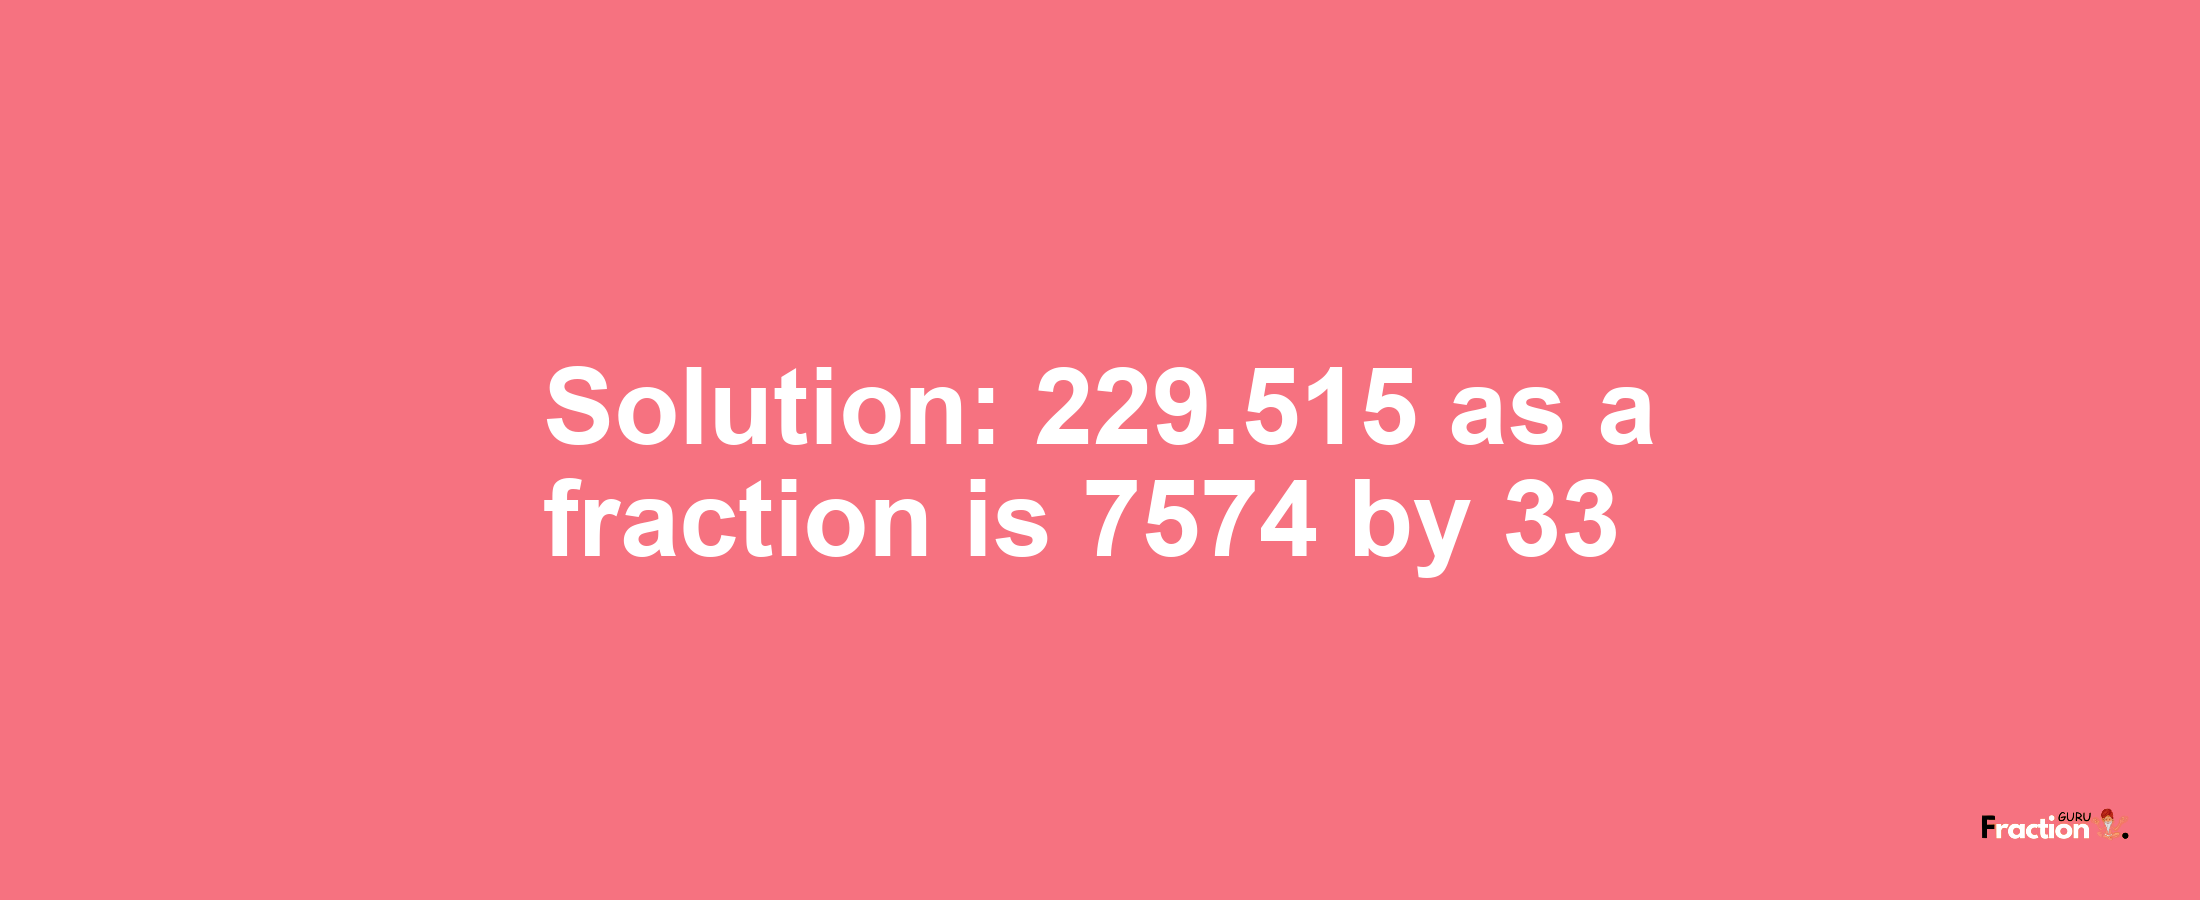 Solution:229.515 as a fraction is 7574/33